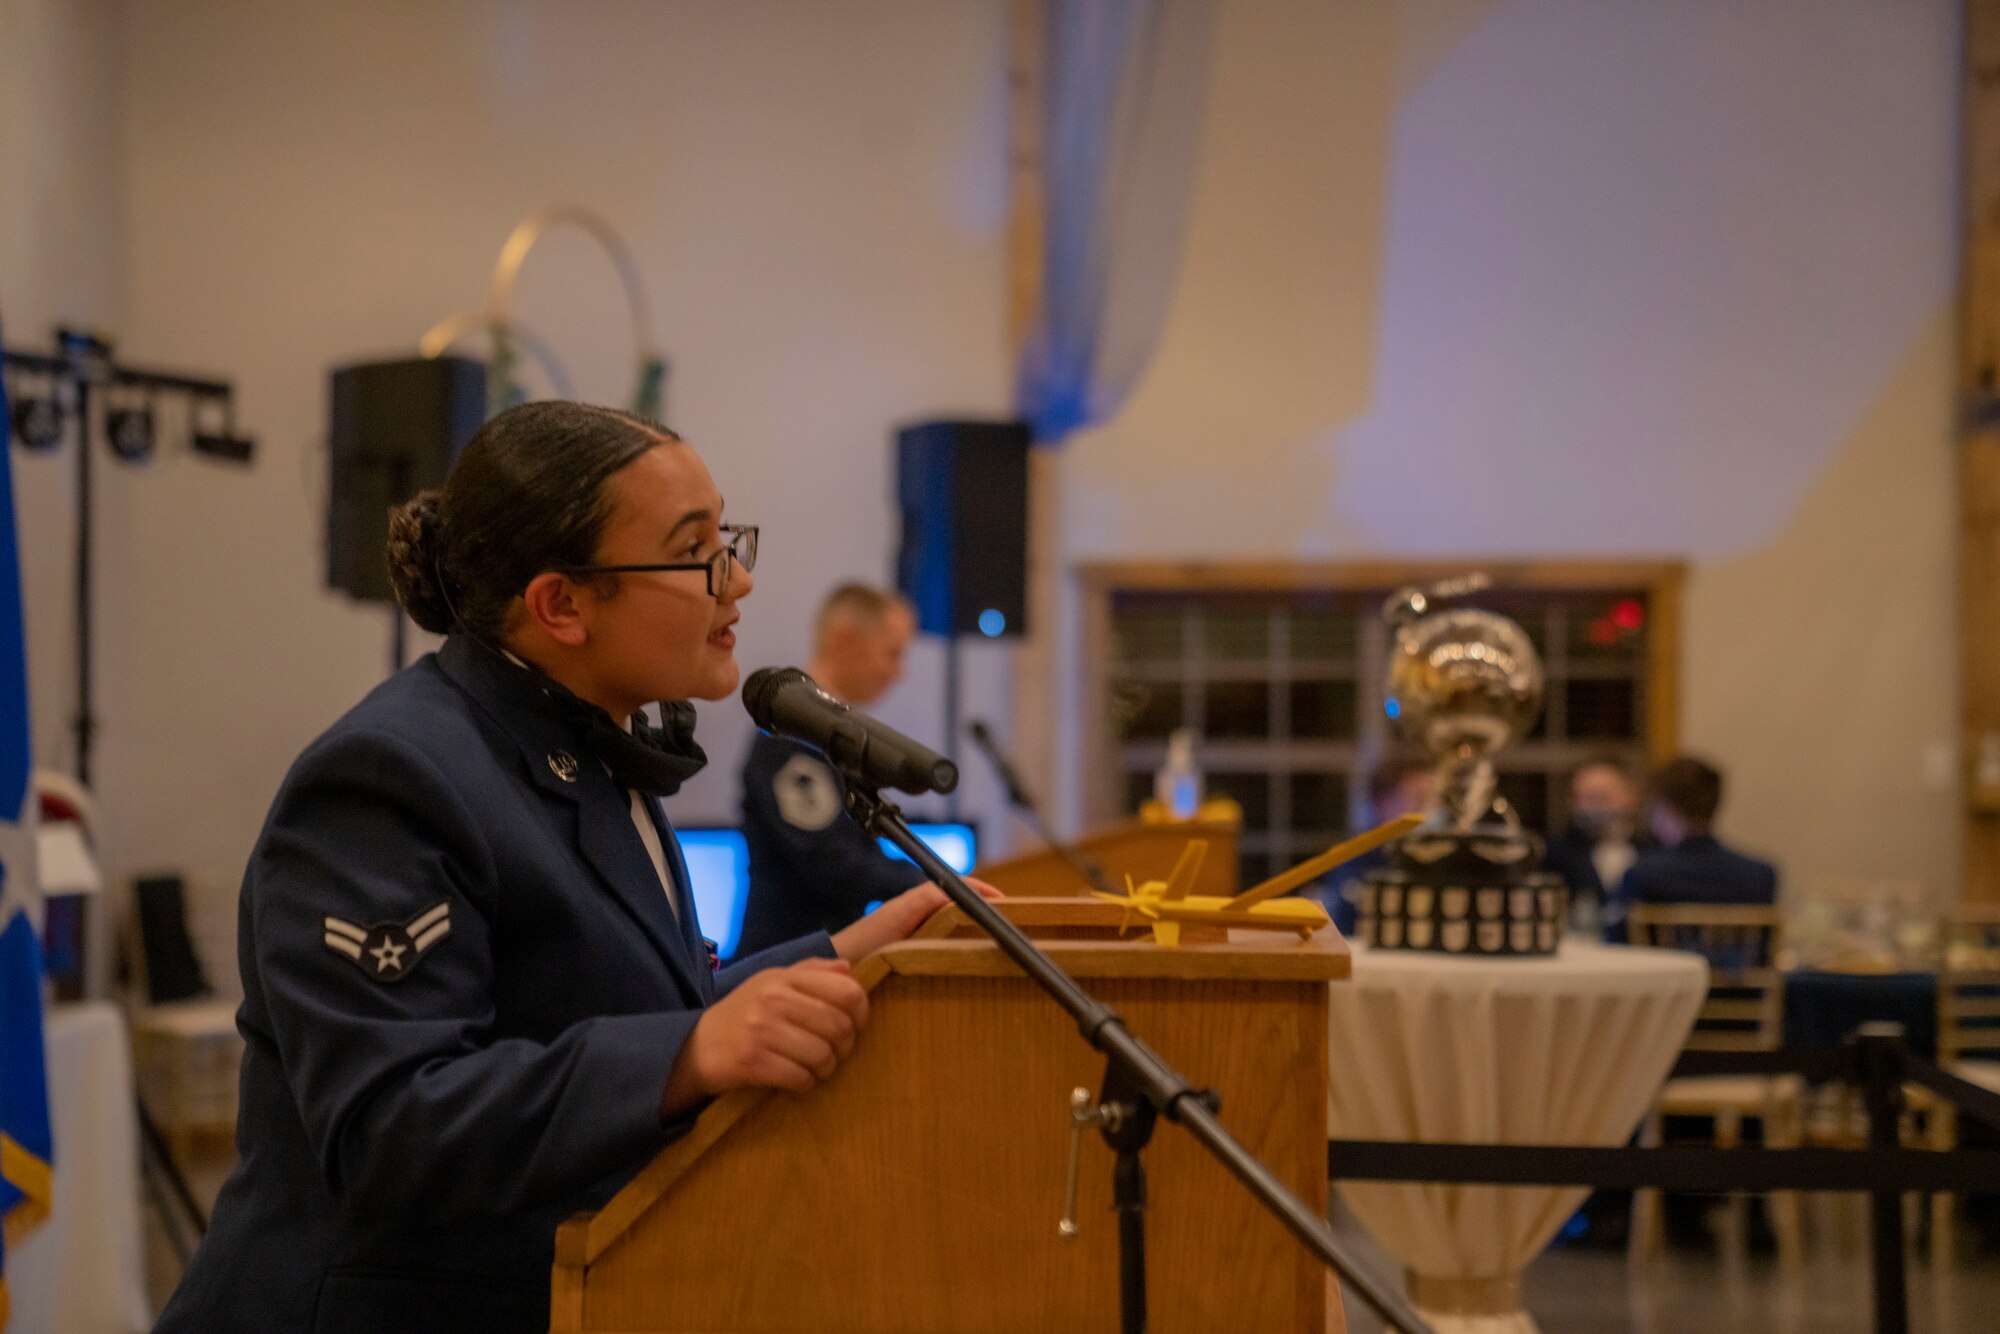 A female Airman leans into a podium to speak to the audience while a male Airman speaks at another podium in the background.